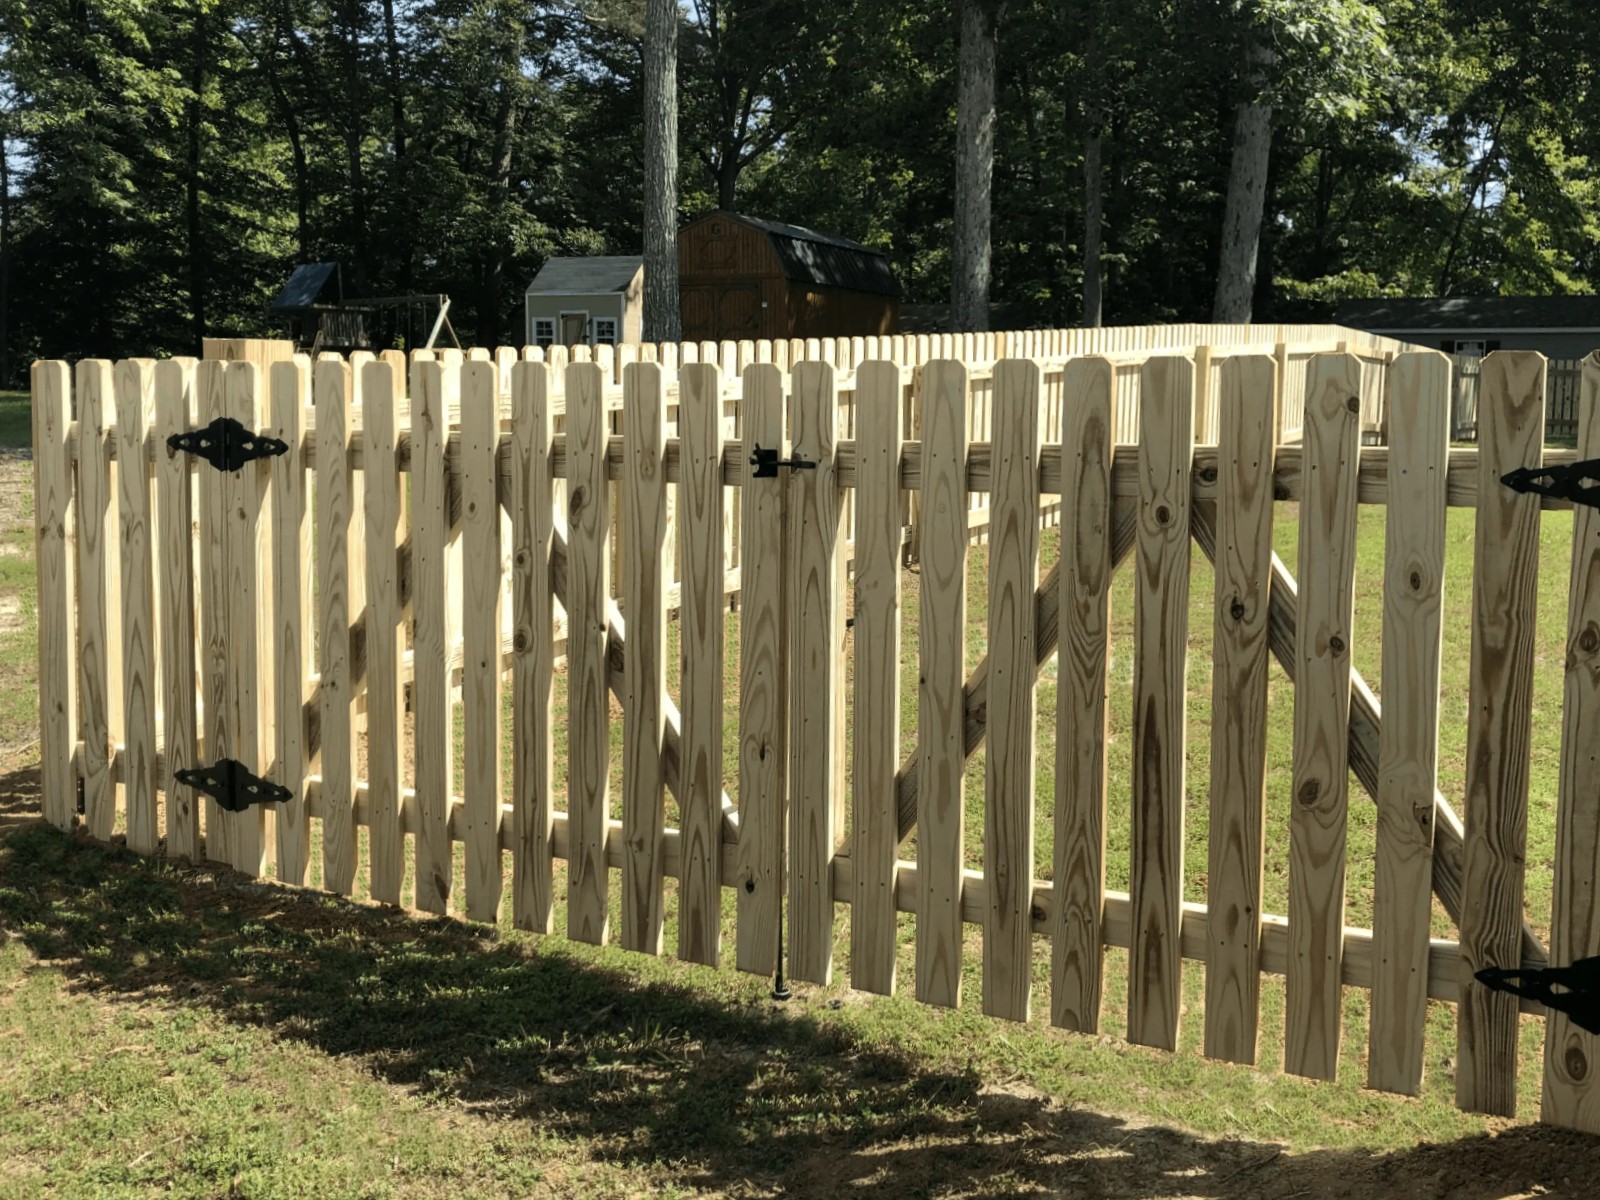 Wood fence section in North Richland Hills, Texas